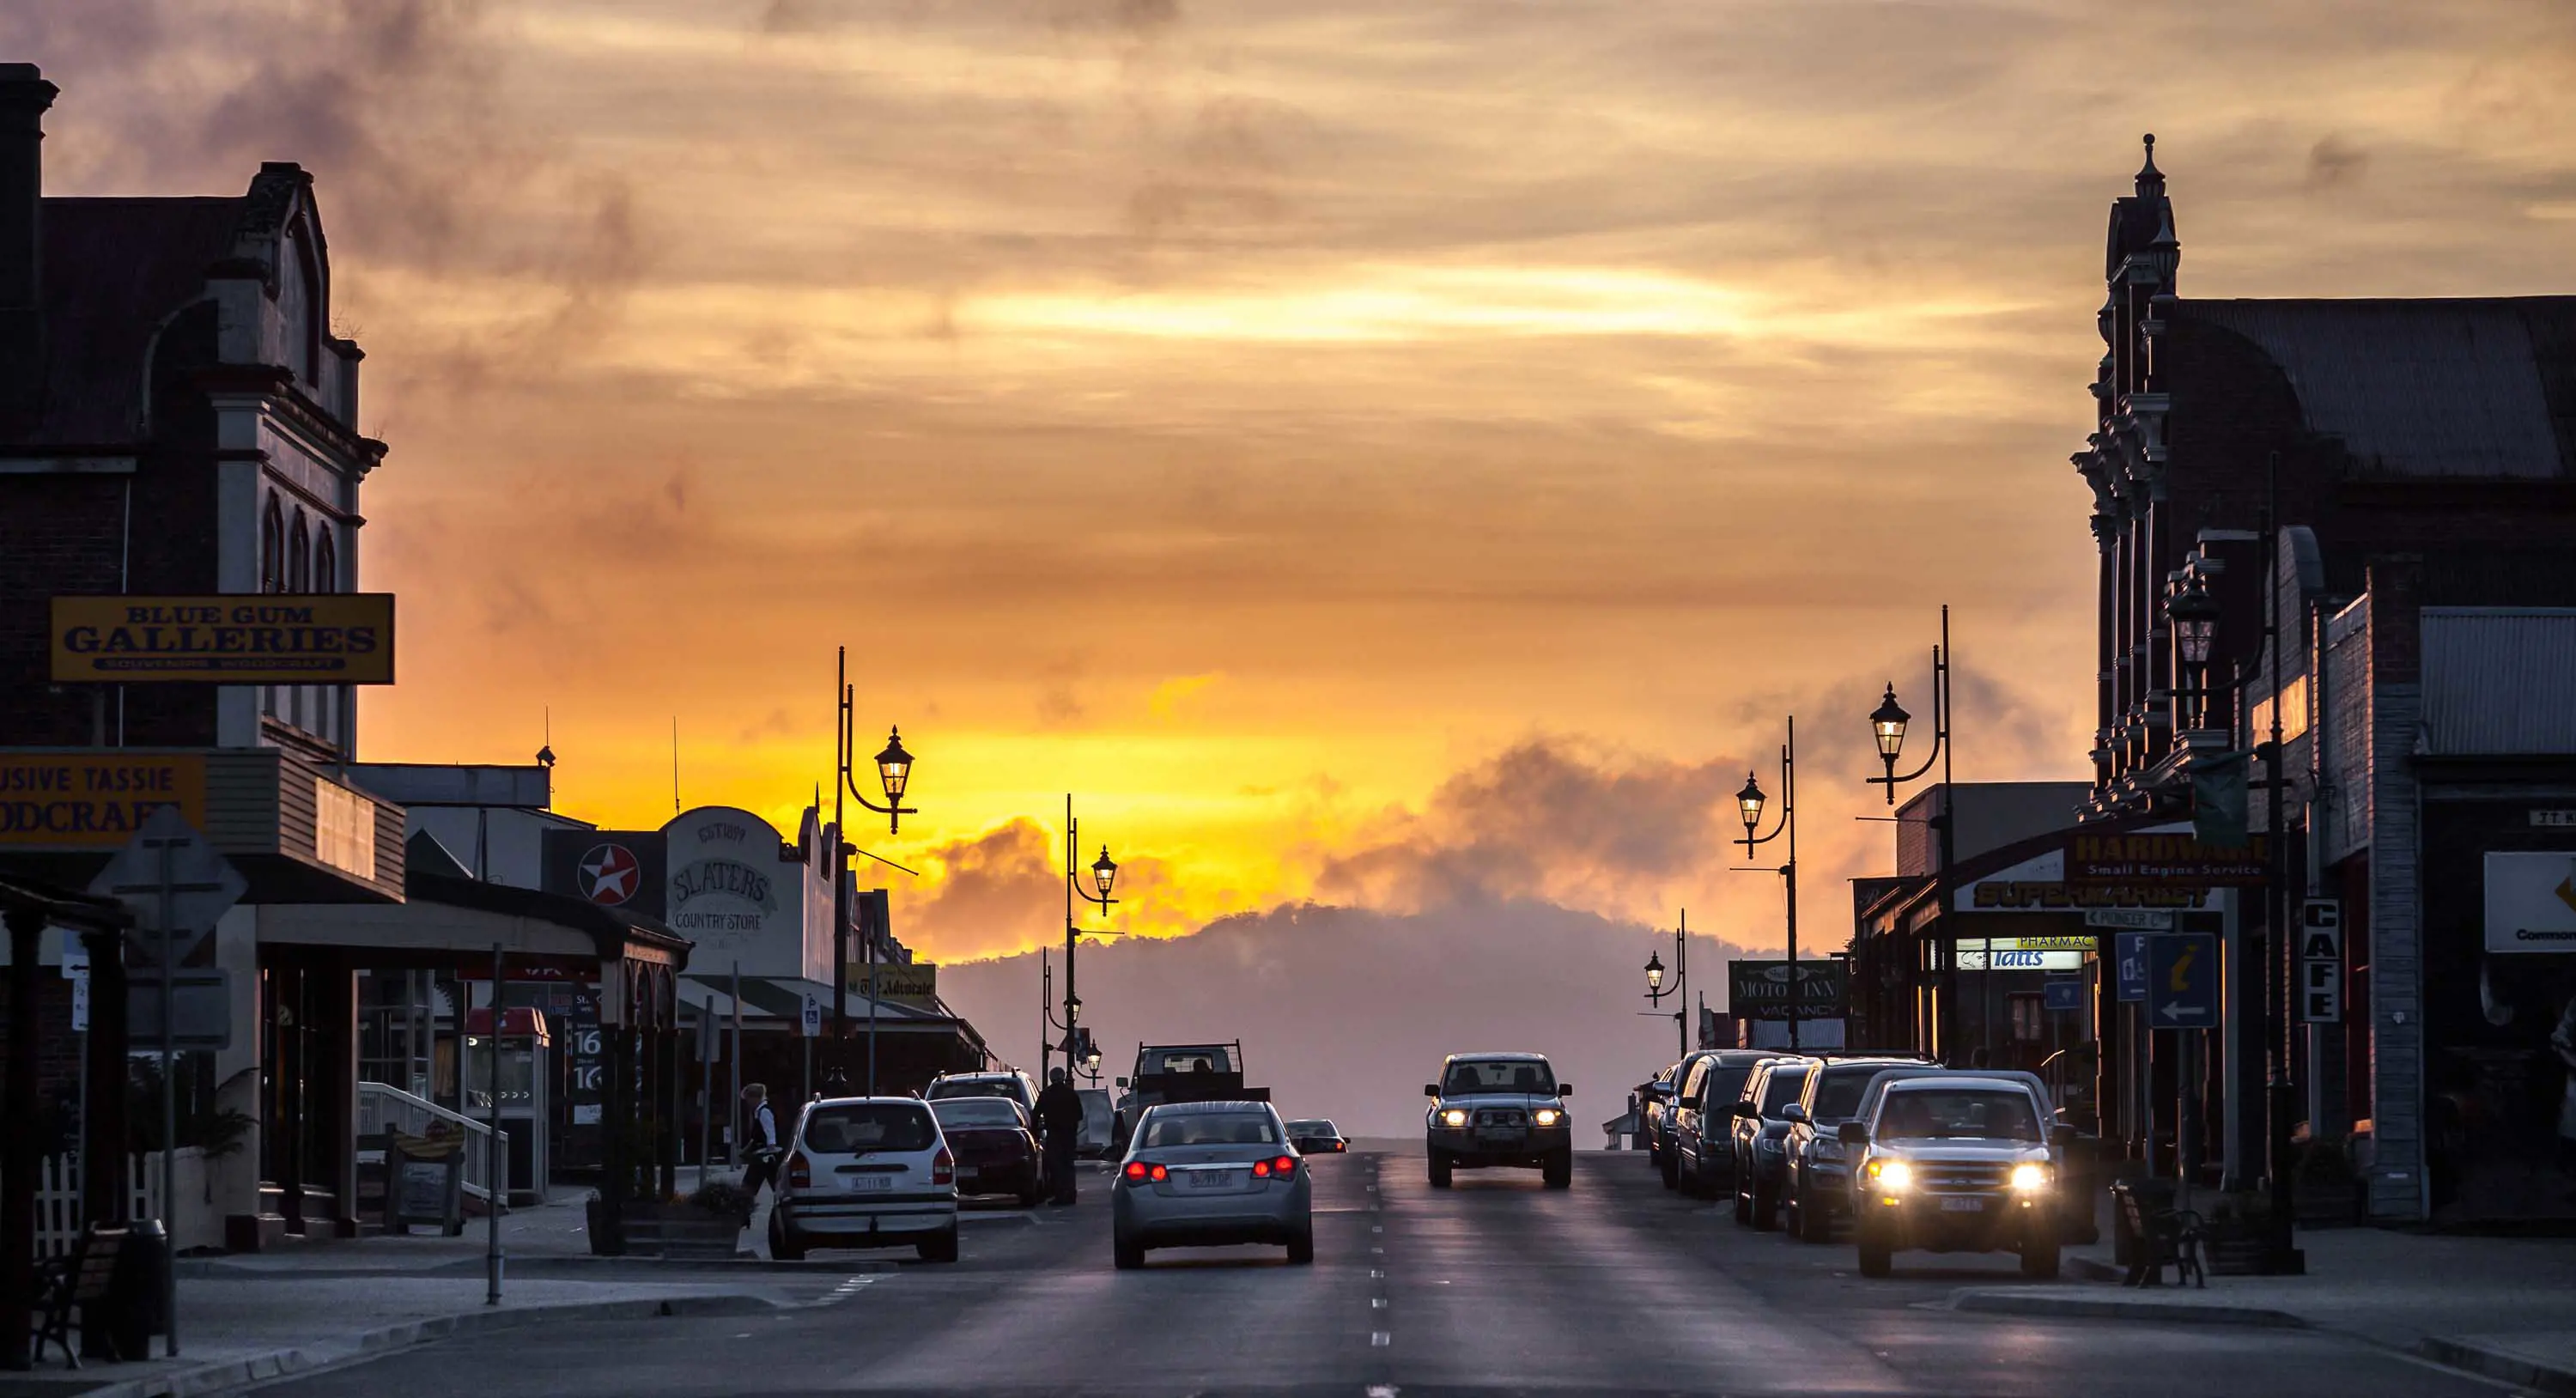 A wide street with cars travelling in both directions lined with old buildings at sunset.